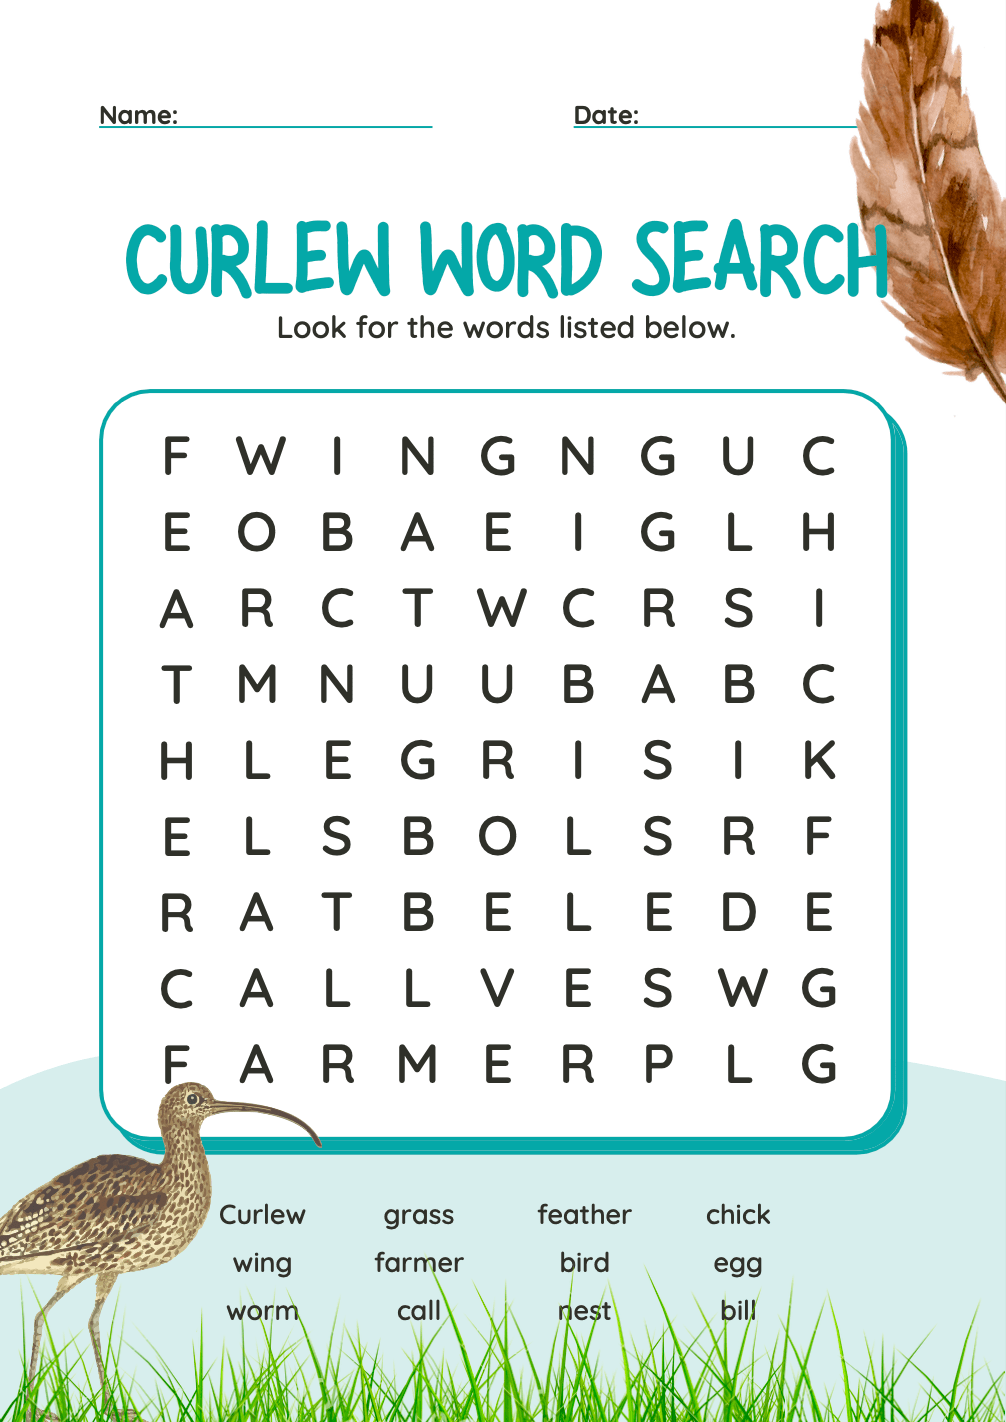 A screenshot of the Curlew Word Search